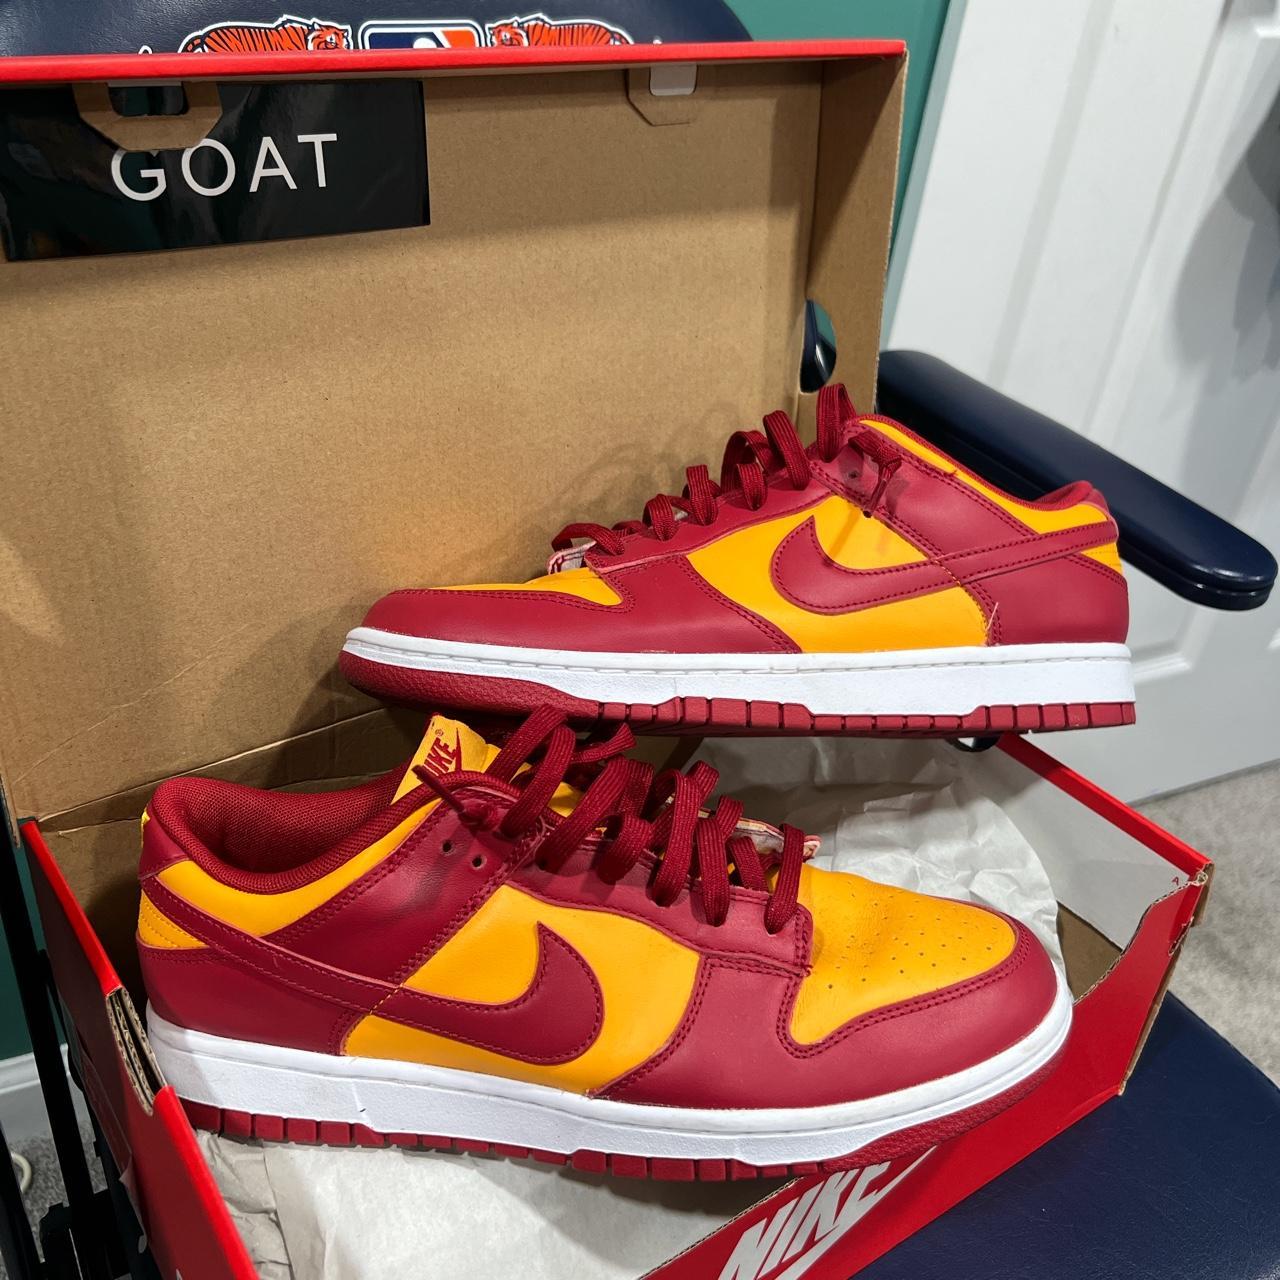 Nike Men's Yellow and Burgundy Trainers | Depop